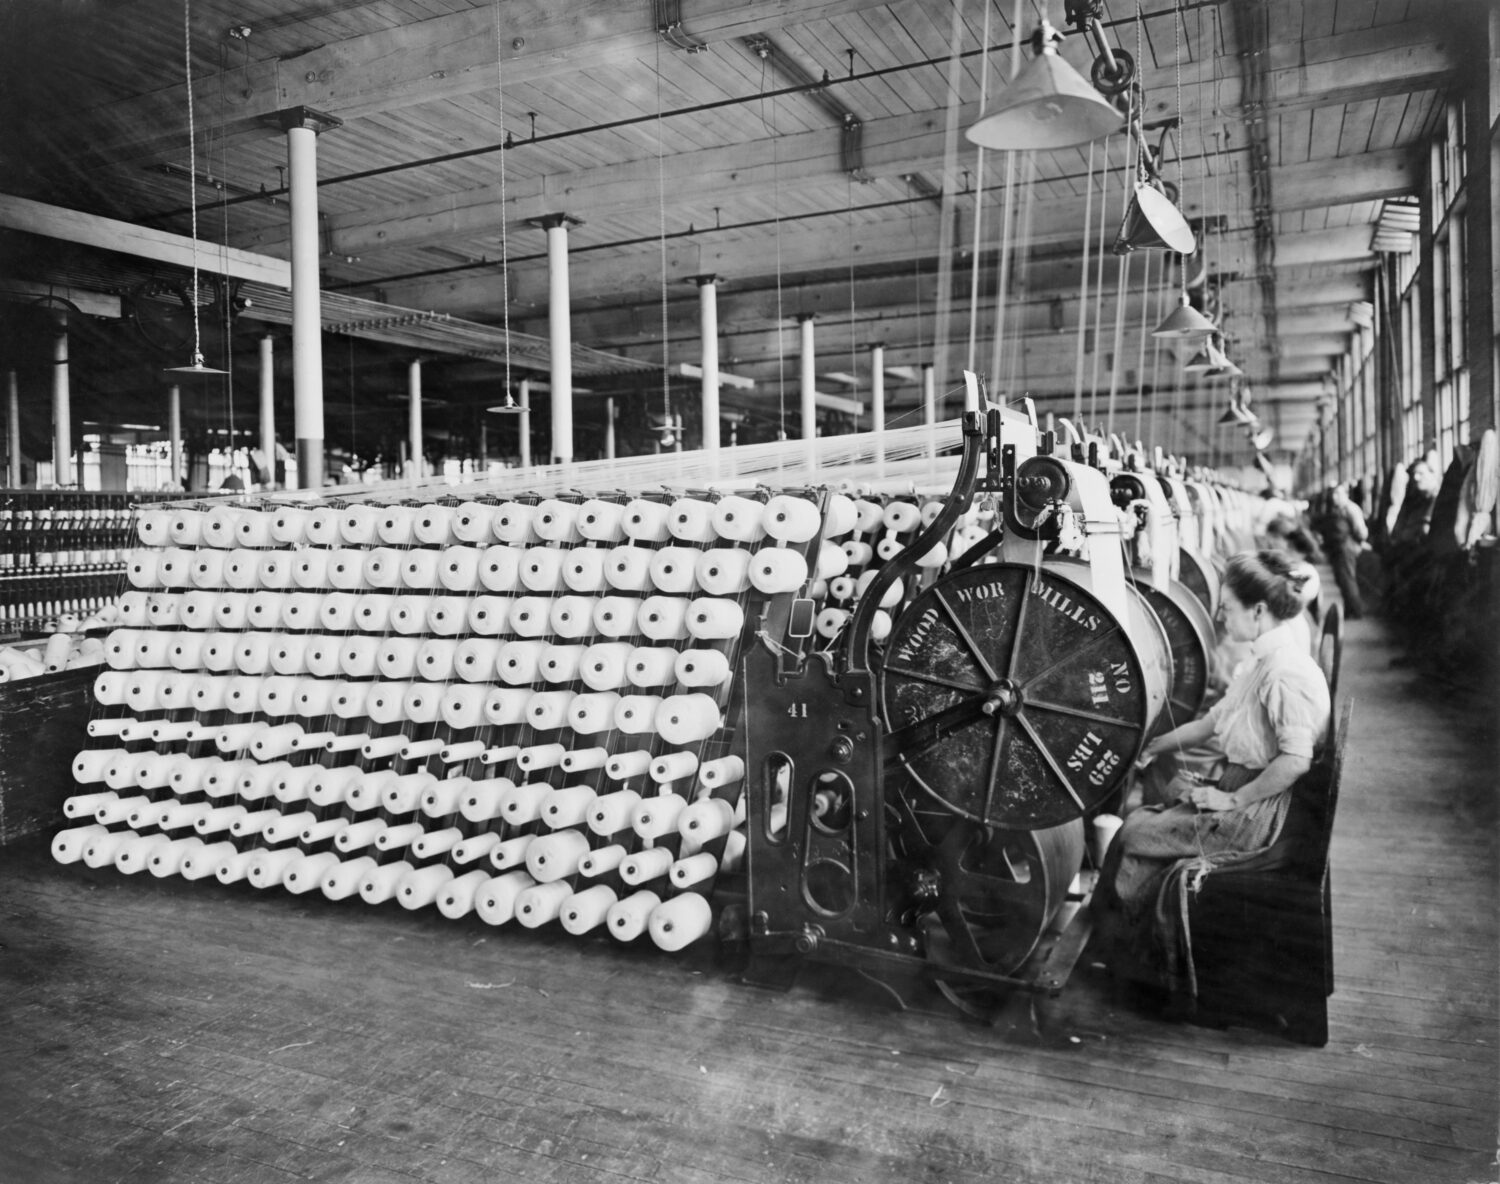 women working in a factory during the Industrial Revolution